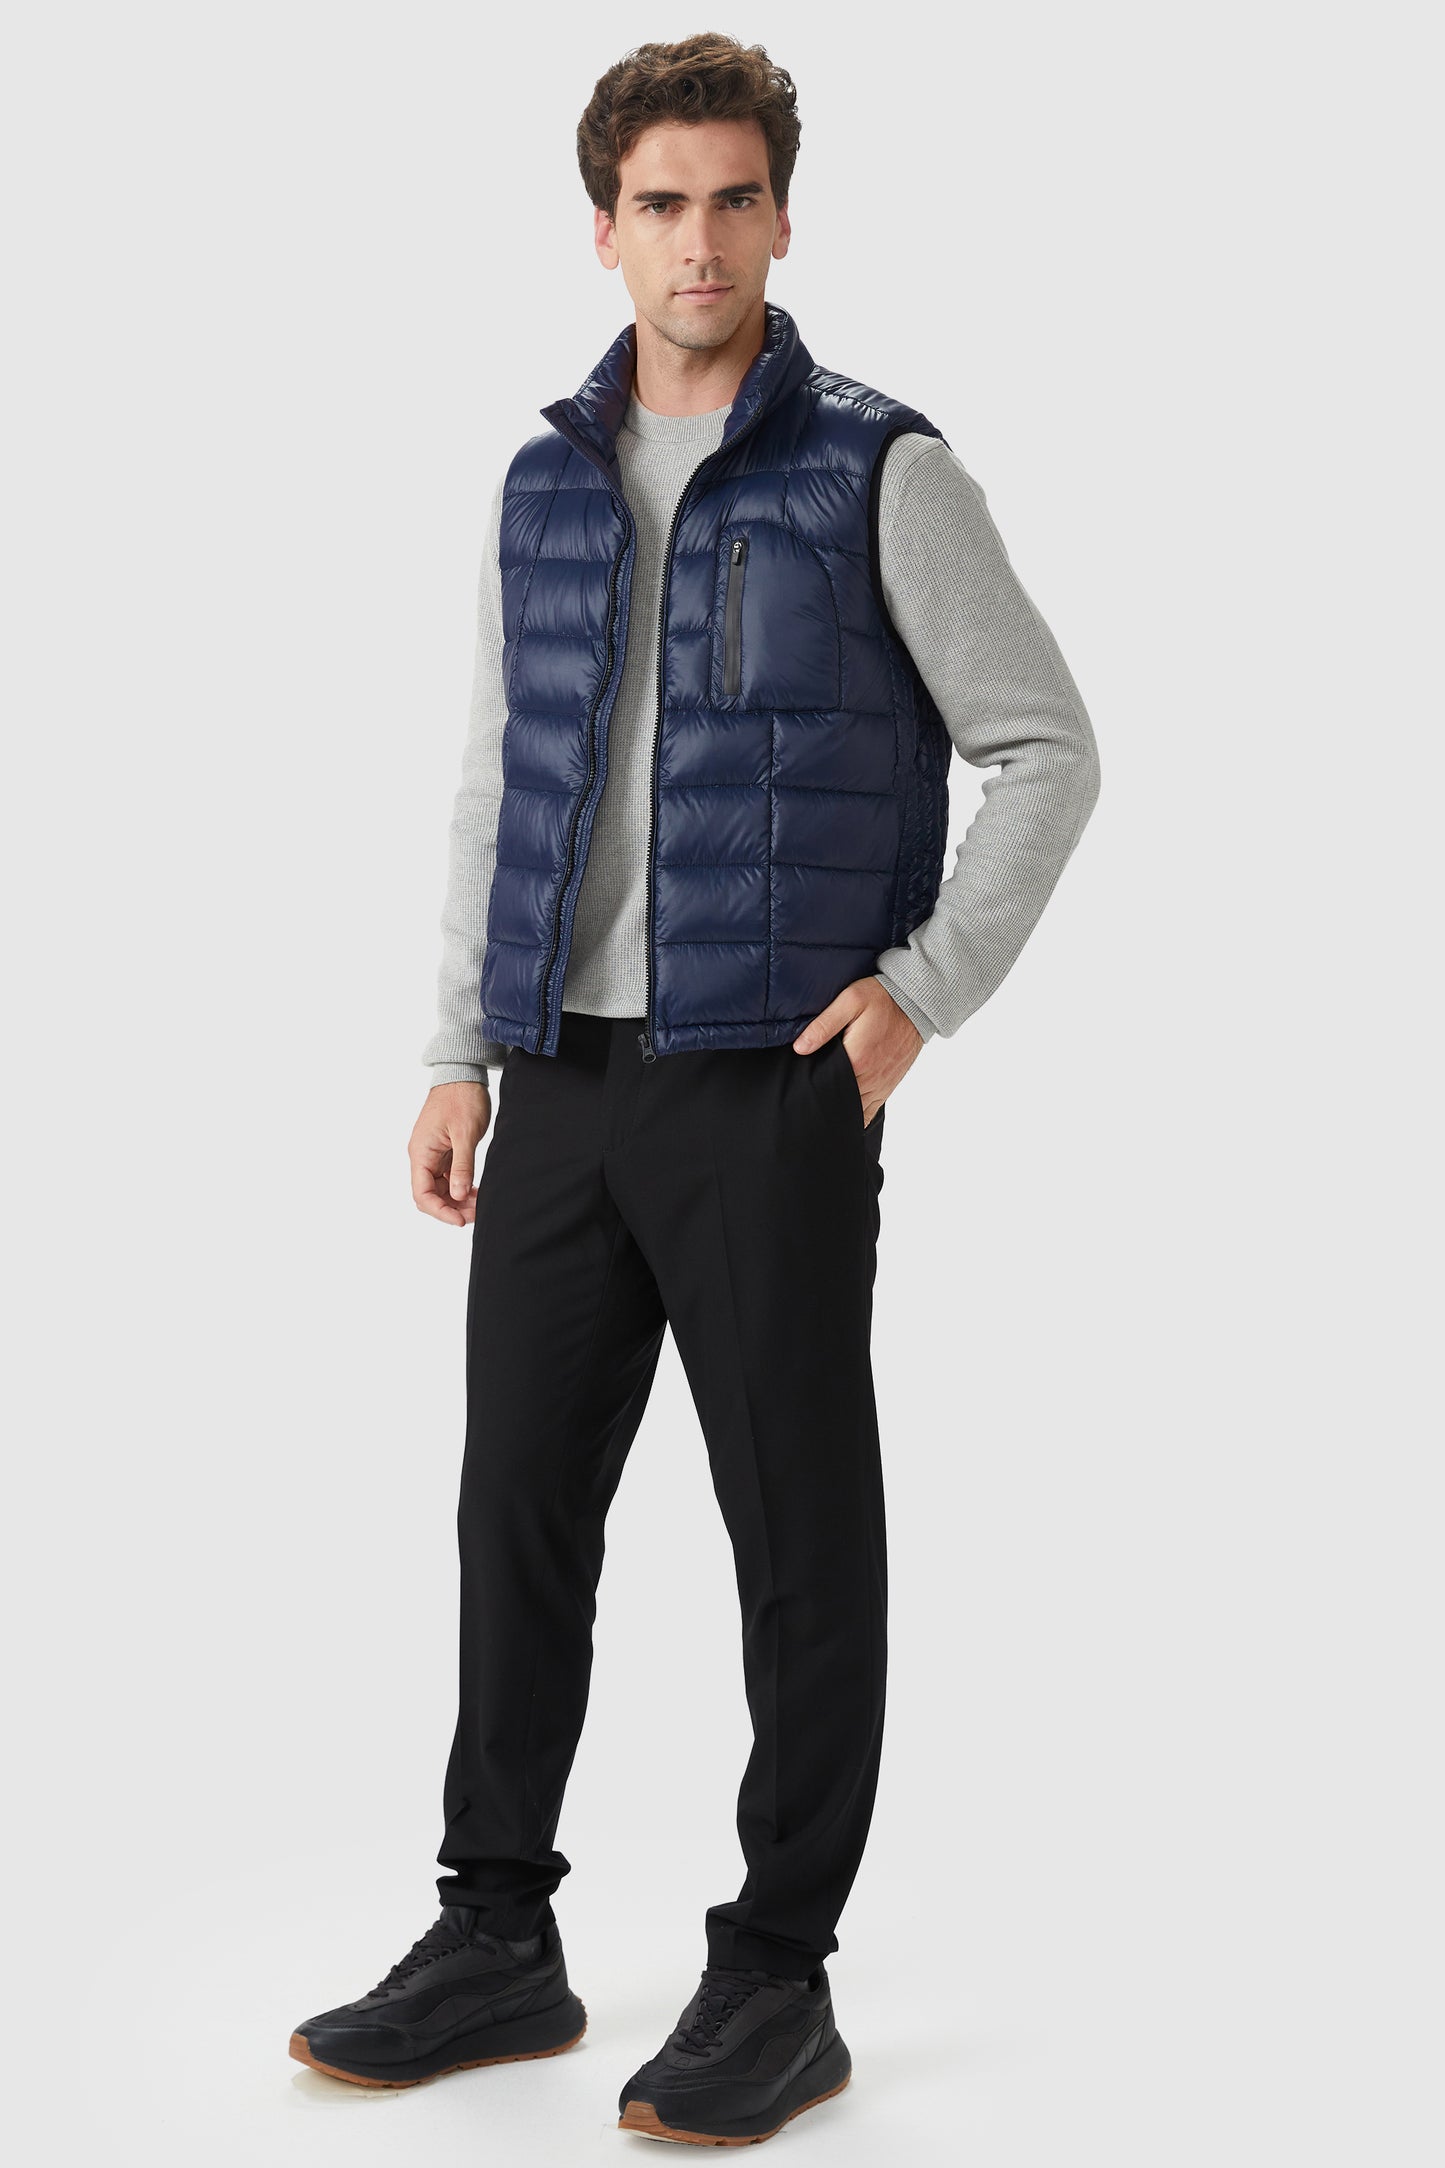 Packable Winter Vest with Stand Collar